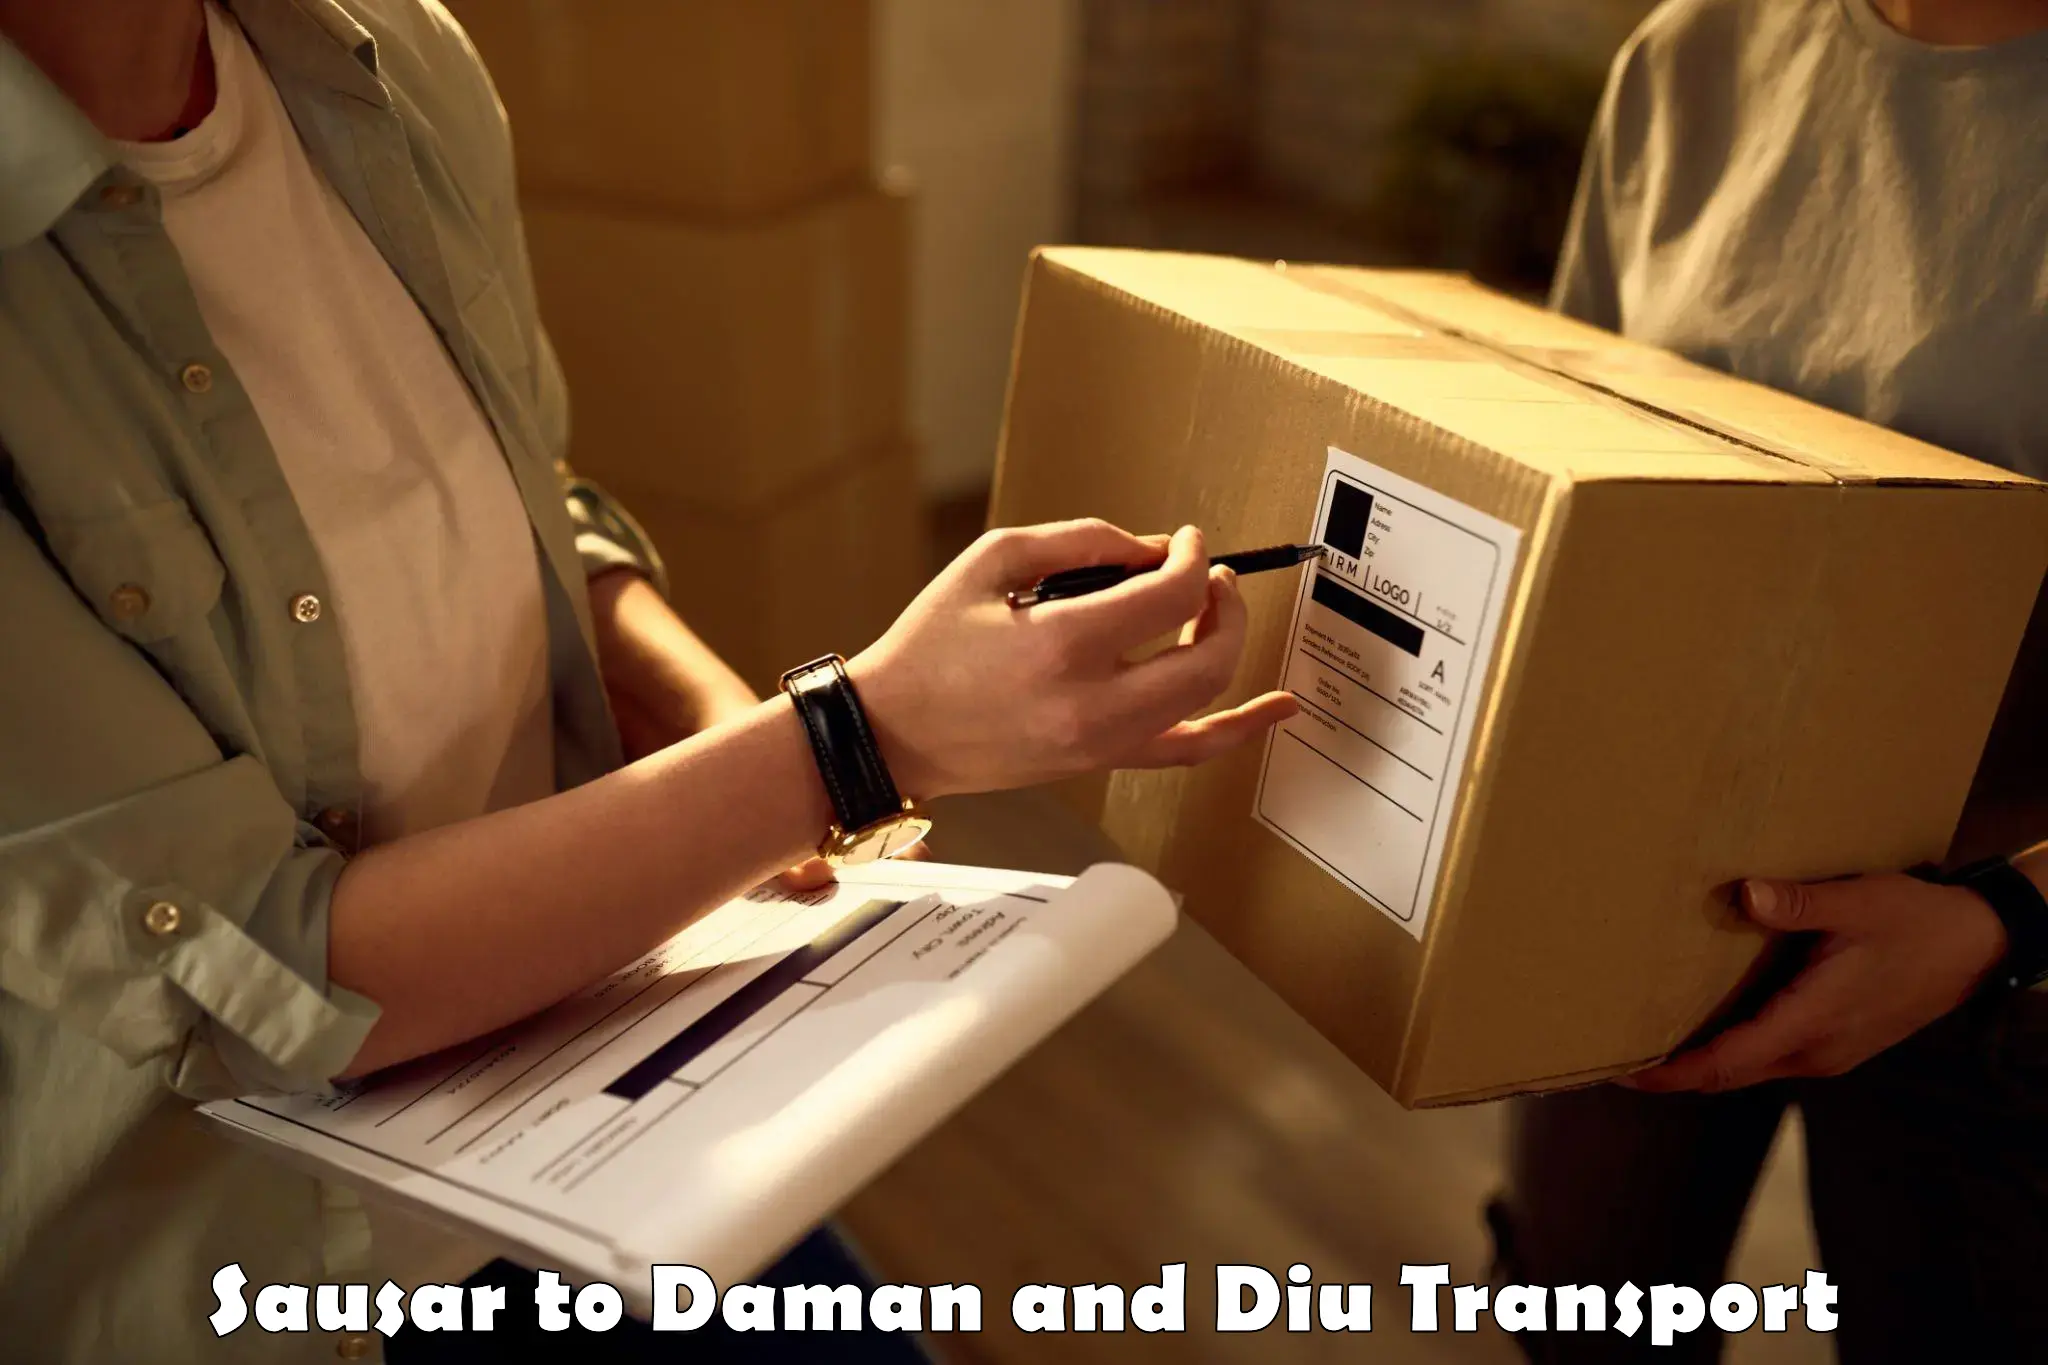 Goods delivery service Sausar to Daman